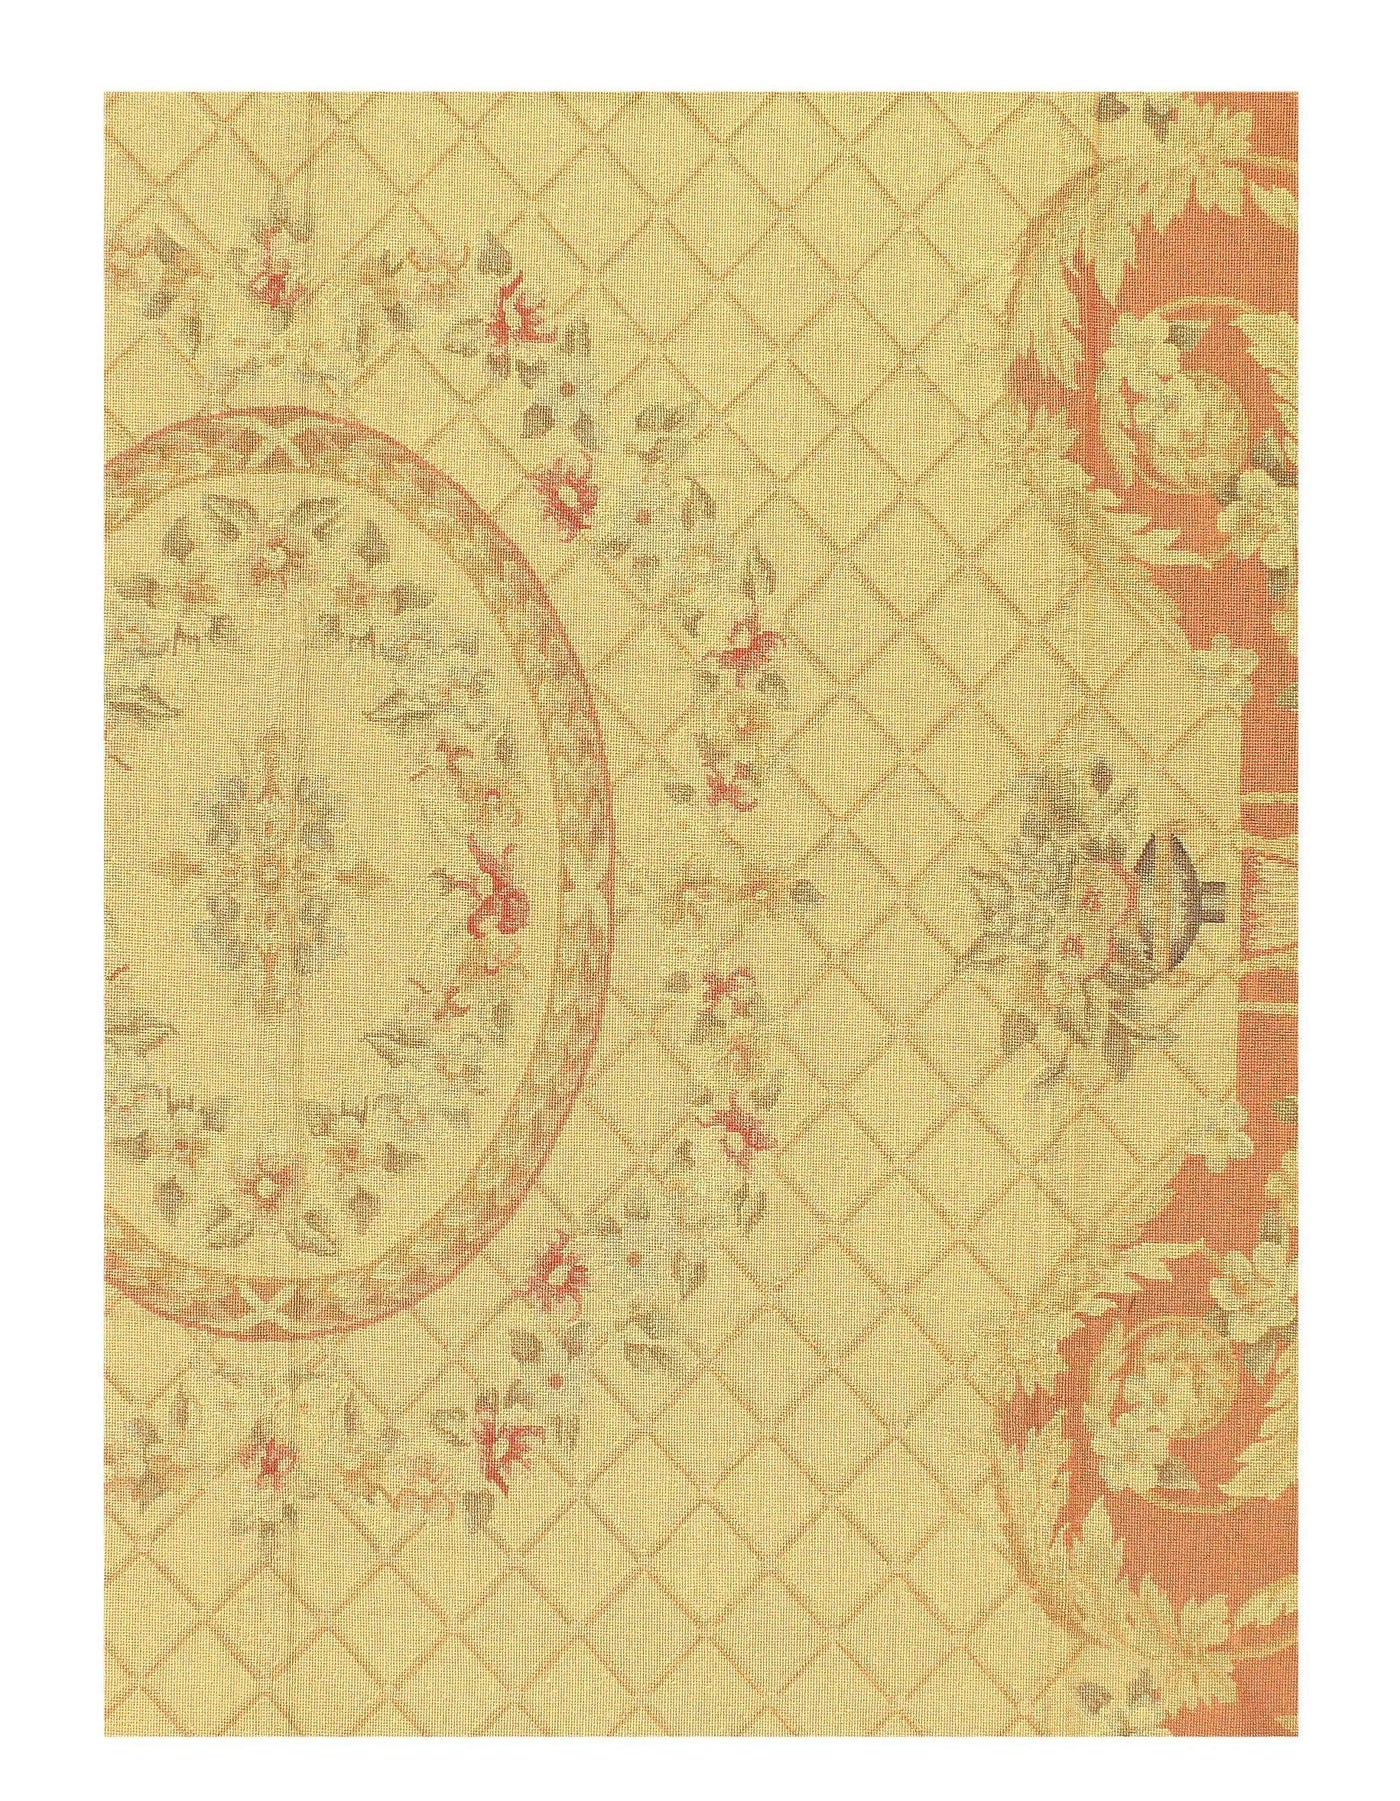 Classic Aubusson Style Rug - 8'4" x 11'7"